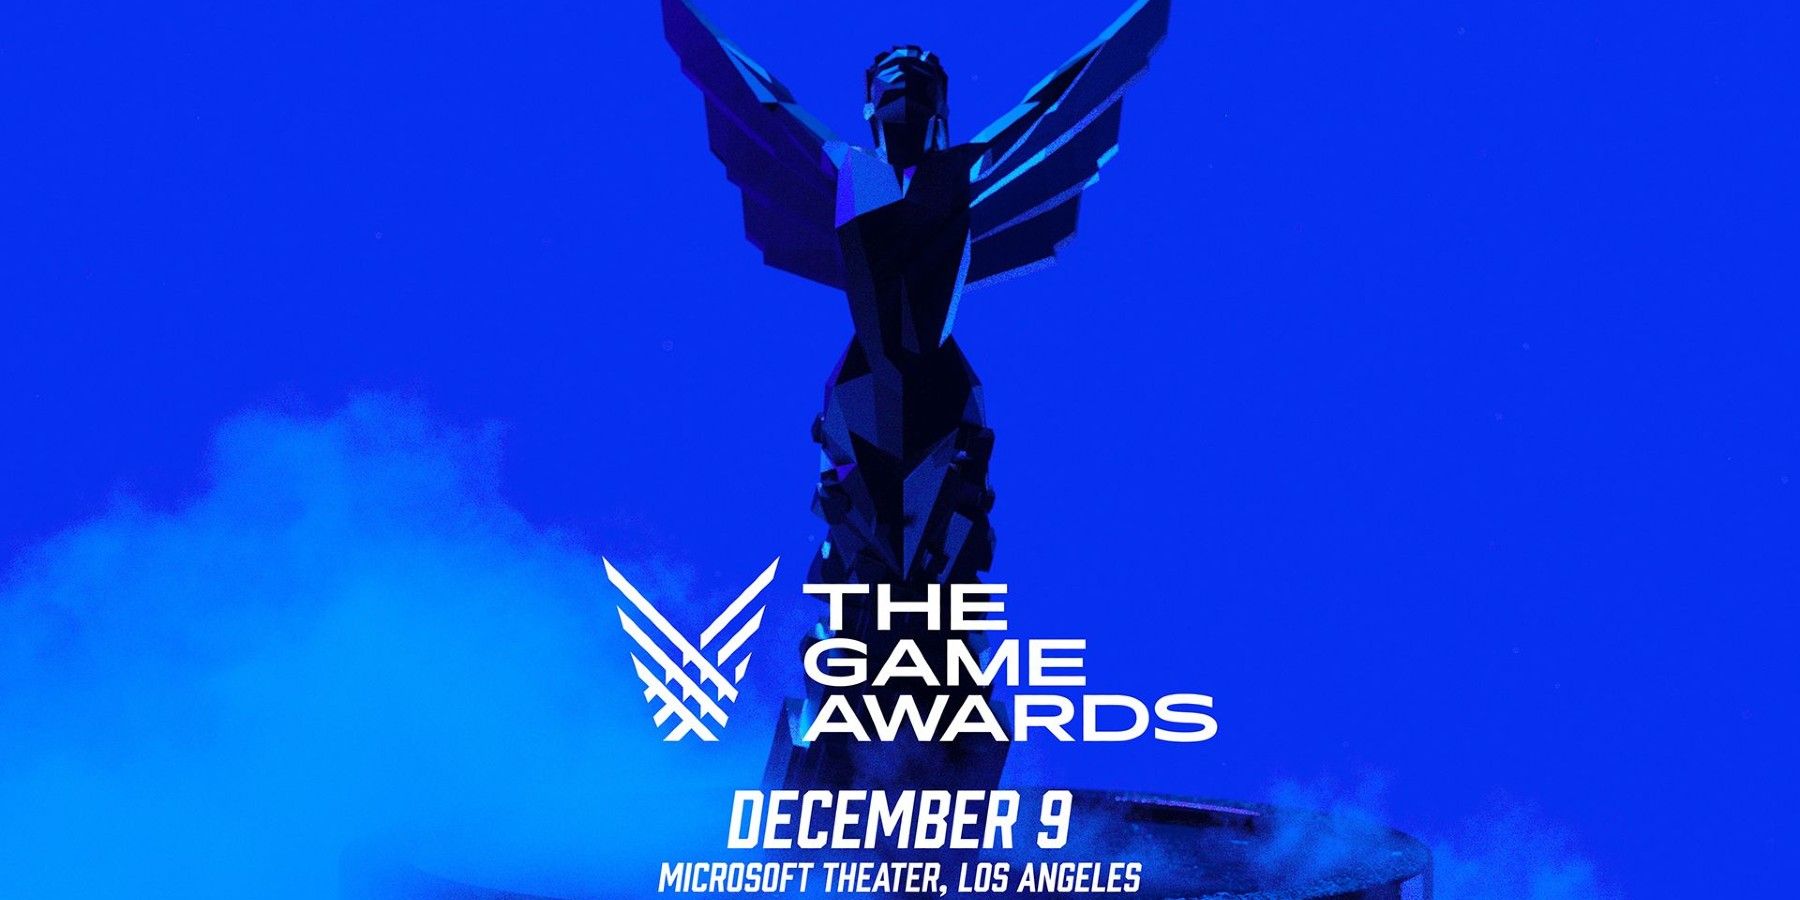 promo ad for The Game Awards 2021